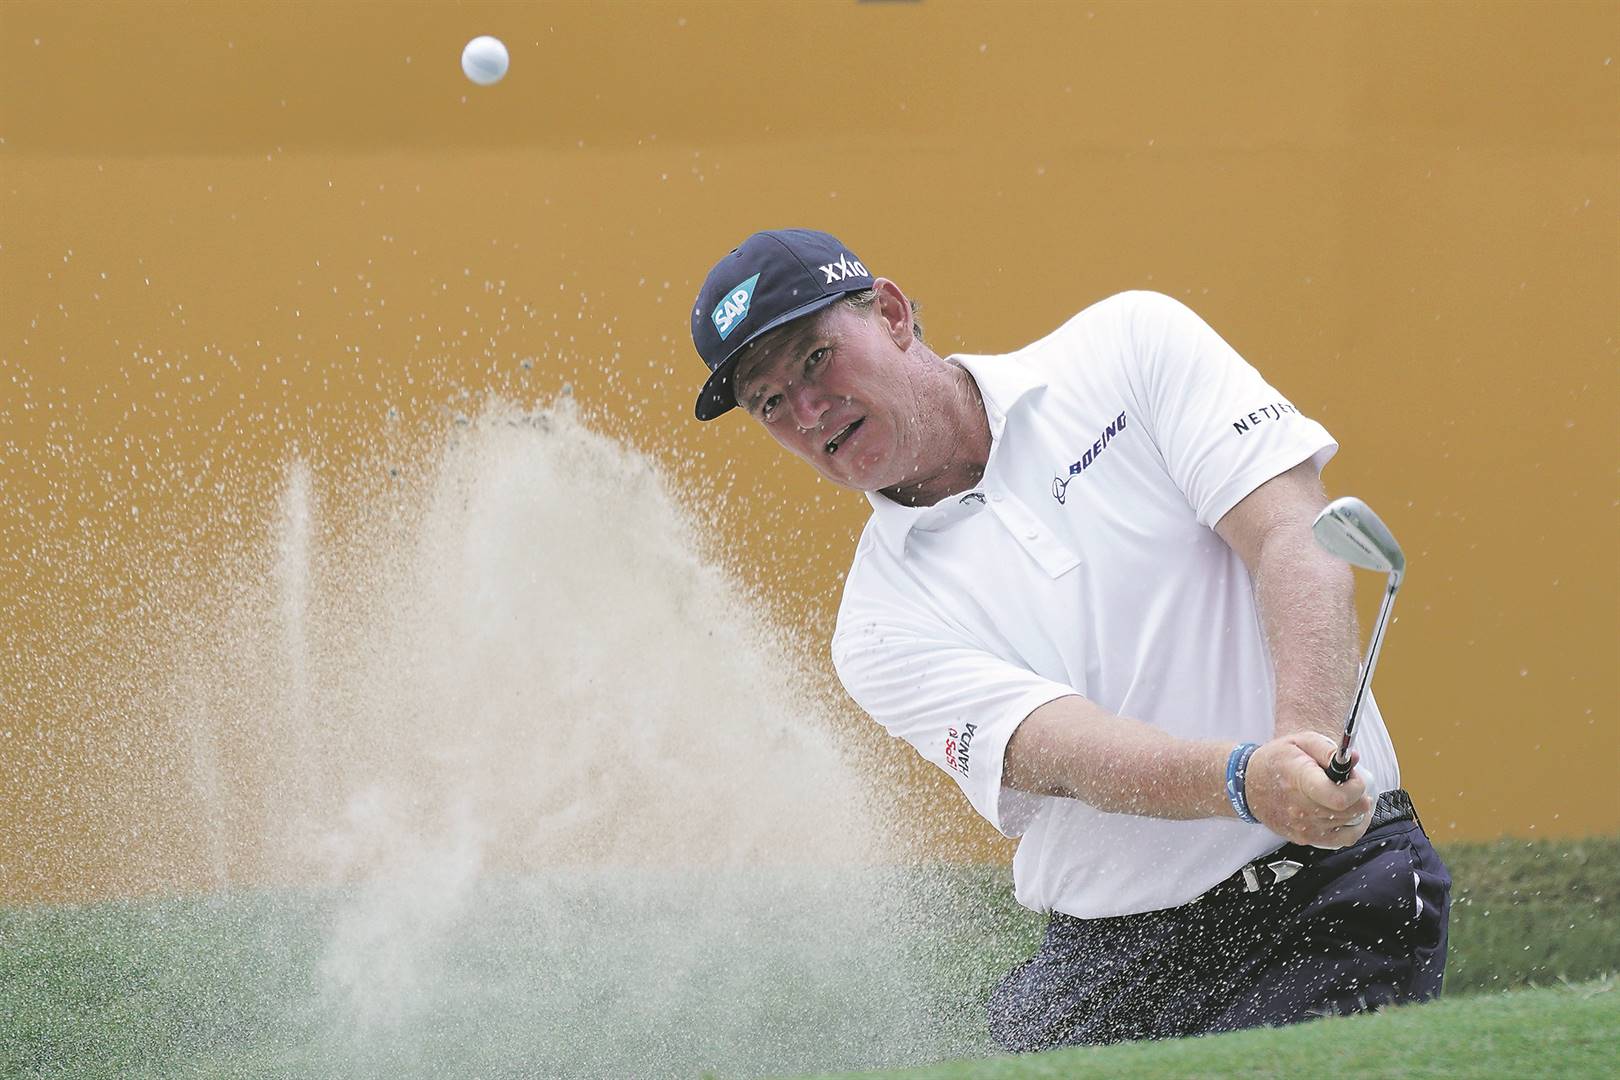 Ernie Els reached his 300th top-10 finish at the Maybank Championship at Saujana Golf and Country Club in Kuala Lumpur, Malaysia, on Sunday Picture: Allsport Co / Getty Images